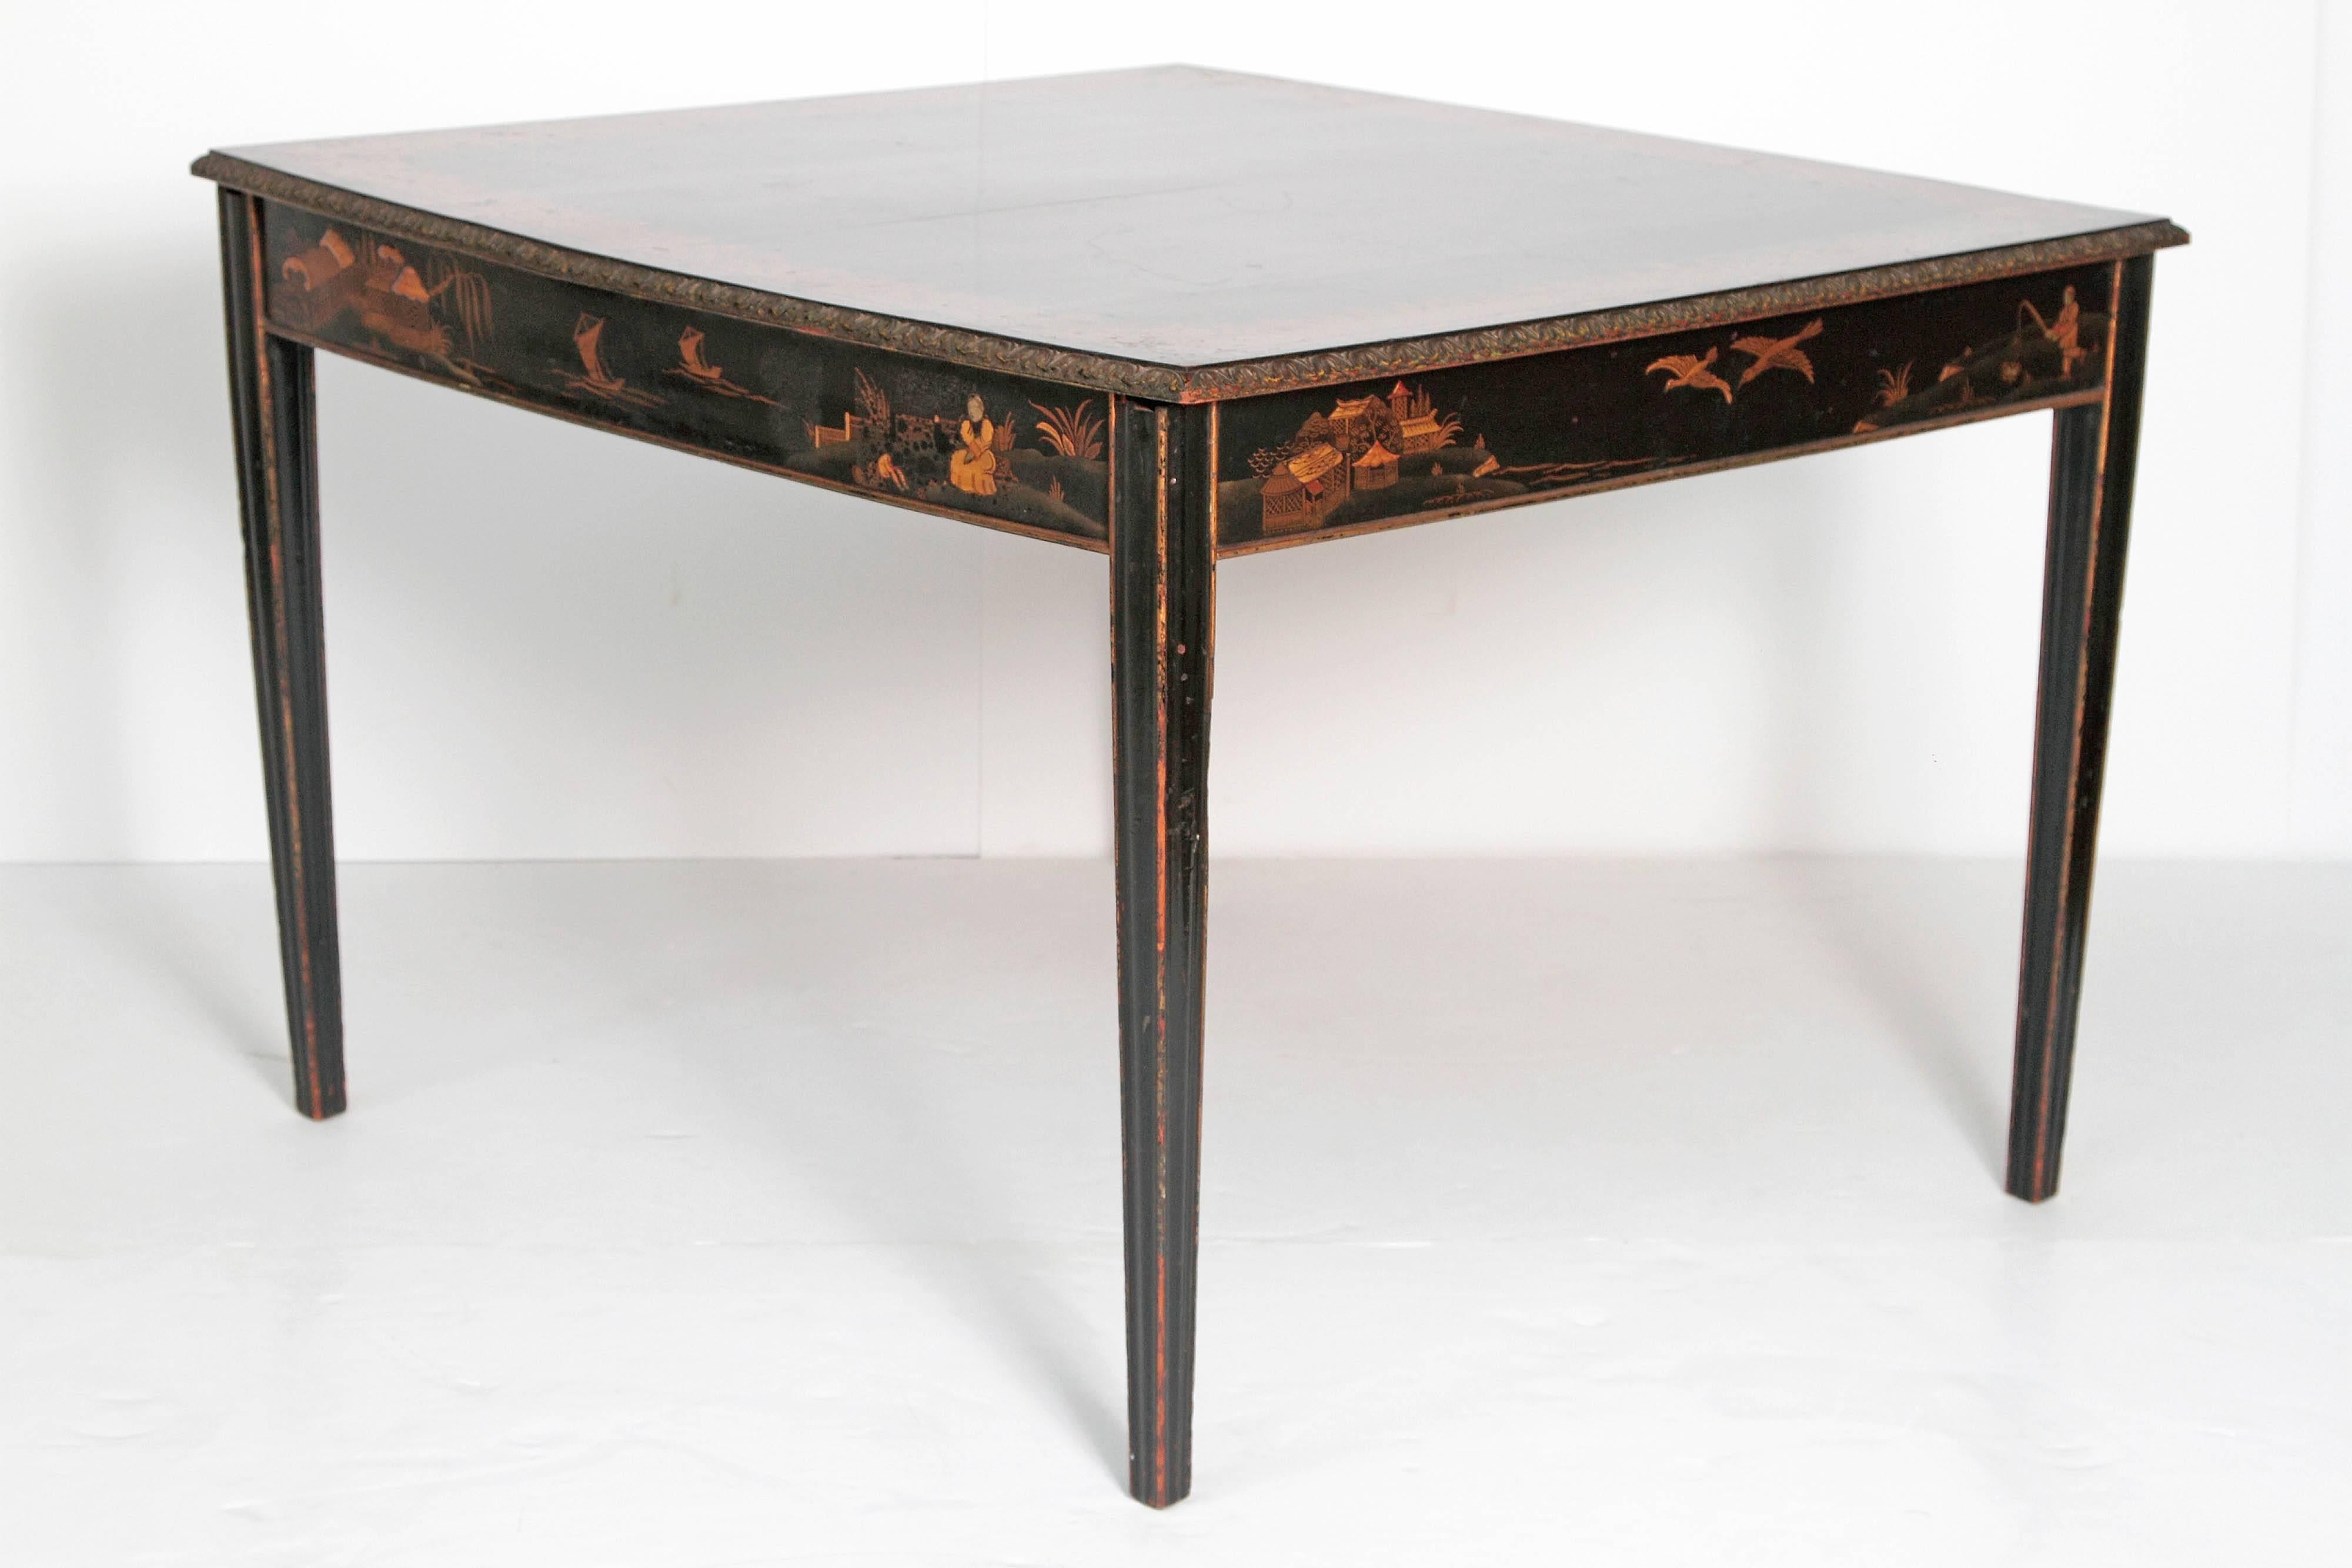 19th Century English Black Lacquer Chinoiserie Card / Games Table (Englisch)